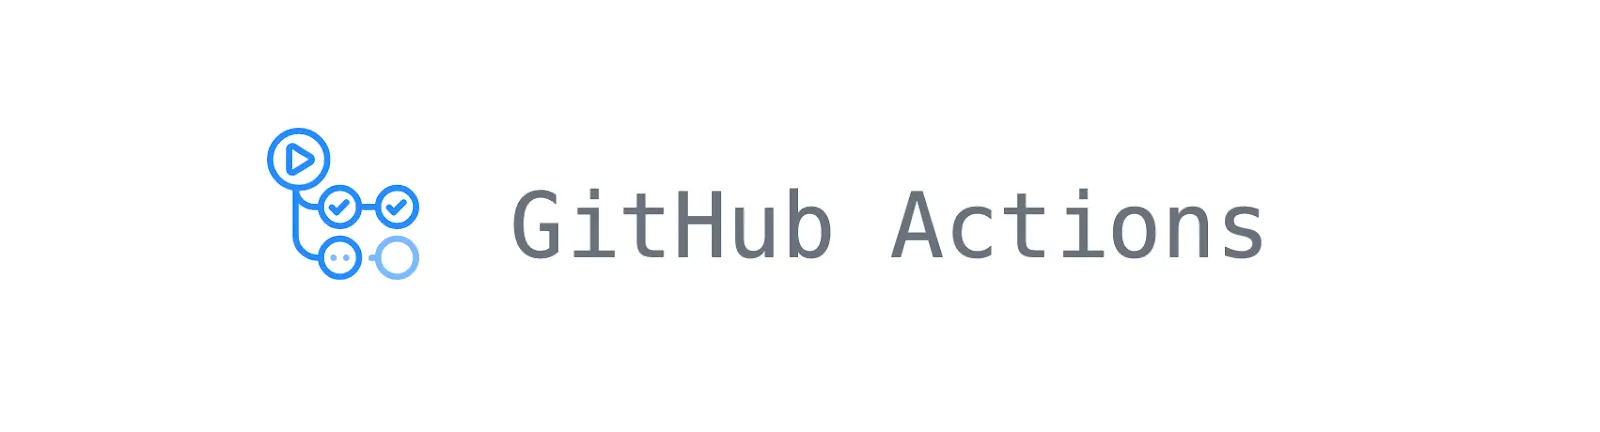 GitHub Actions Tutorial for Beginners to Automate Your Workflow